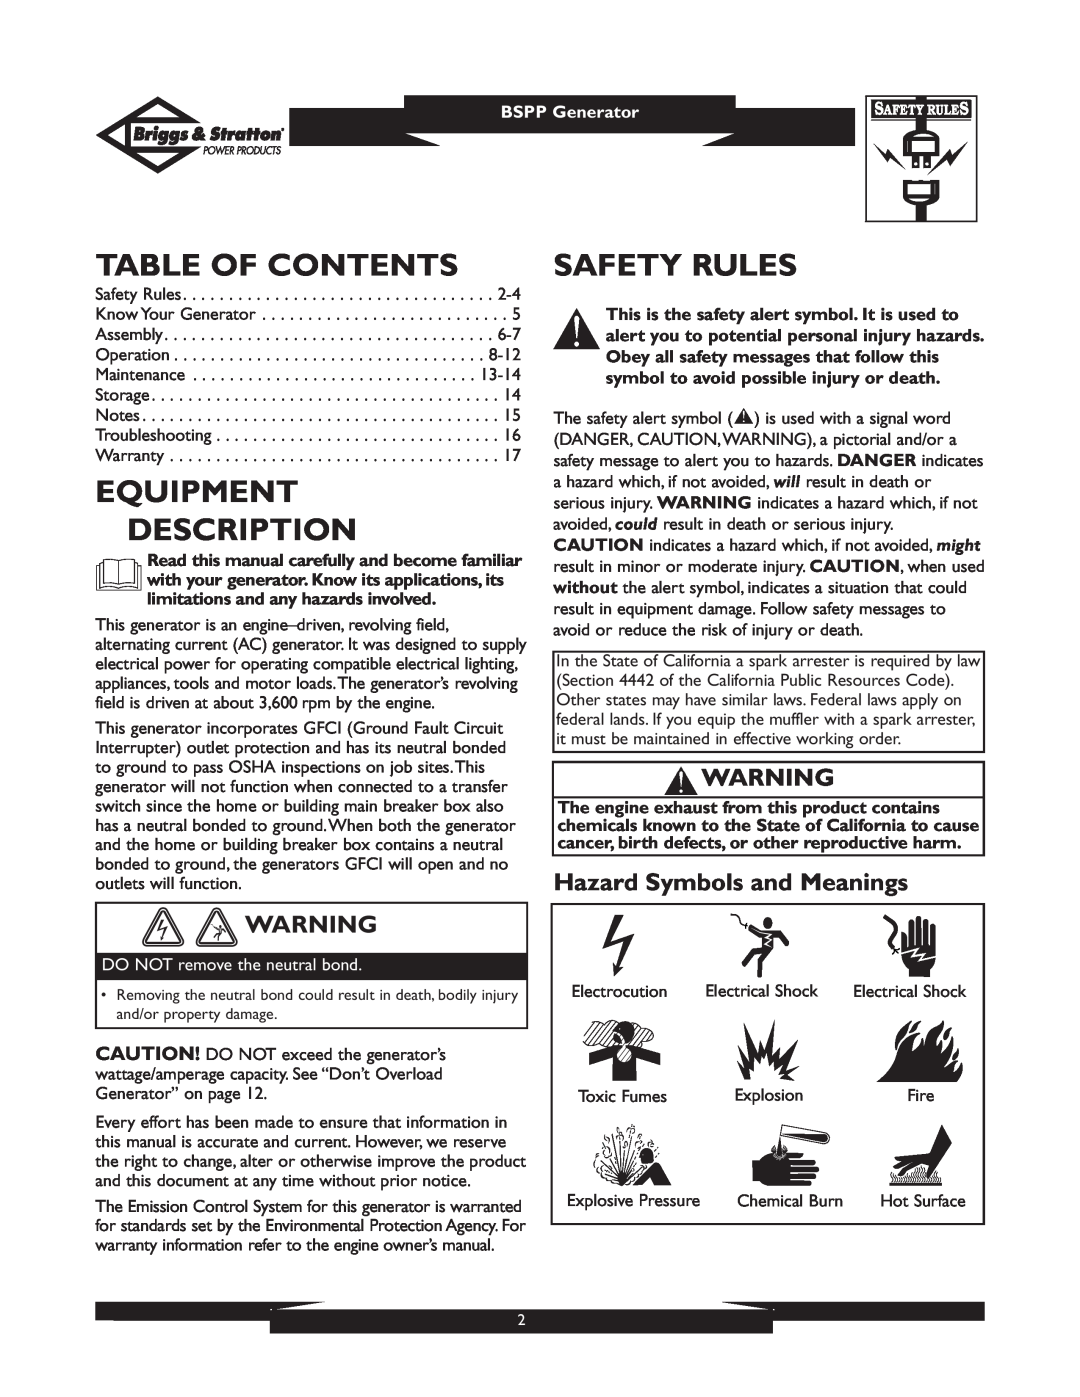 Briggs & Stratton PRO6500 01933, 01932 Table Of Contents, Equipment Description, Safety Rules, Hazard Symbols and Meanings 